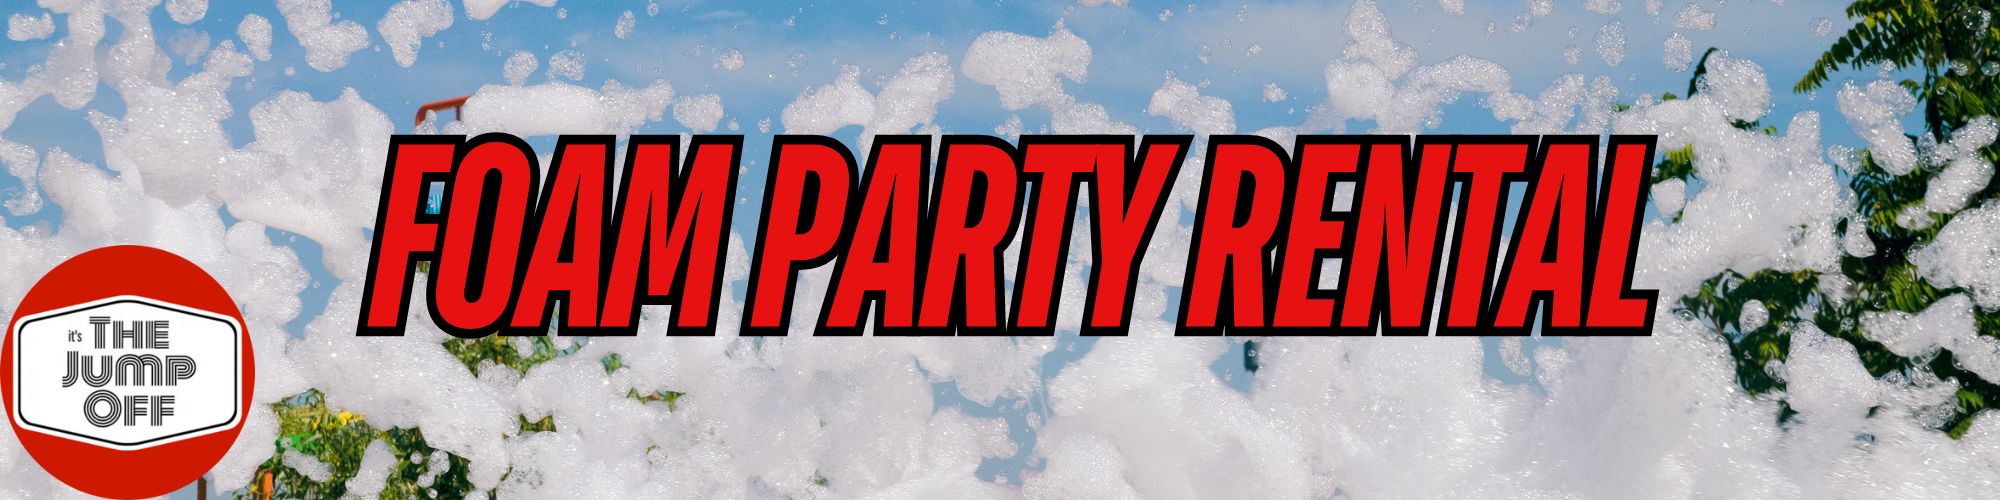 Foam Party Rental - The Jump Off